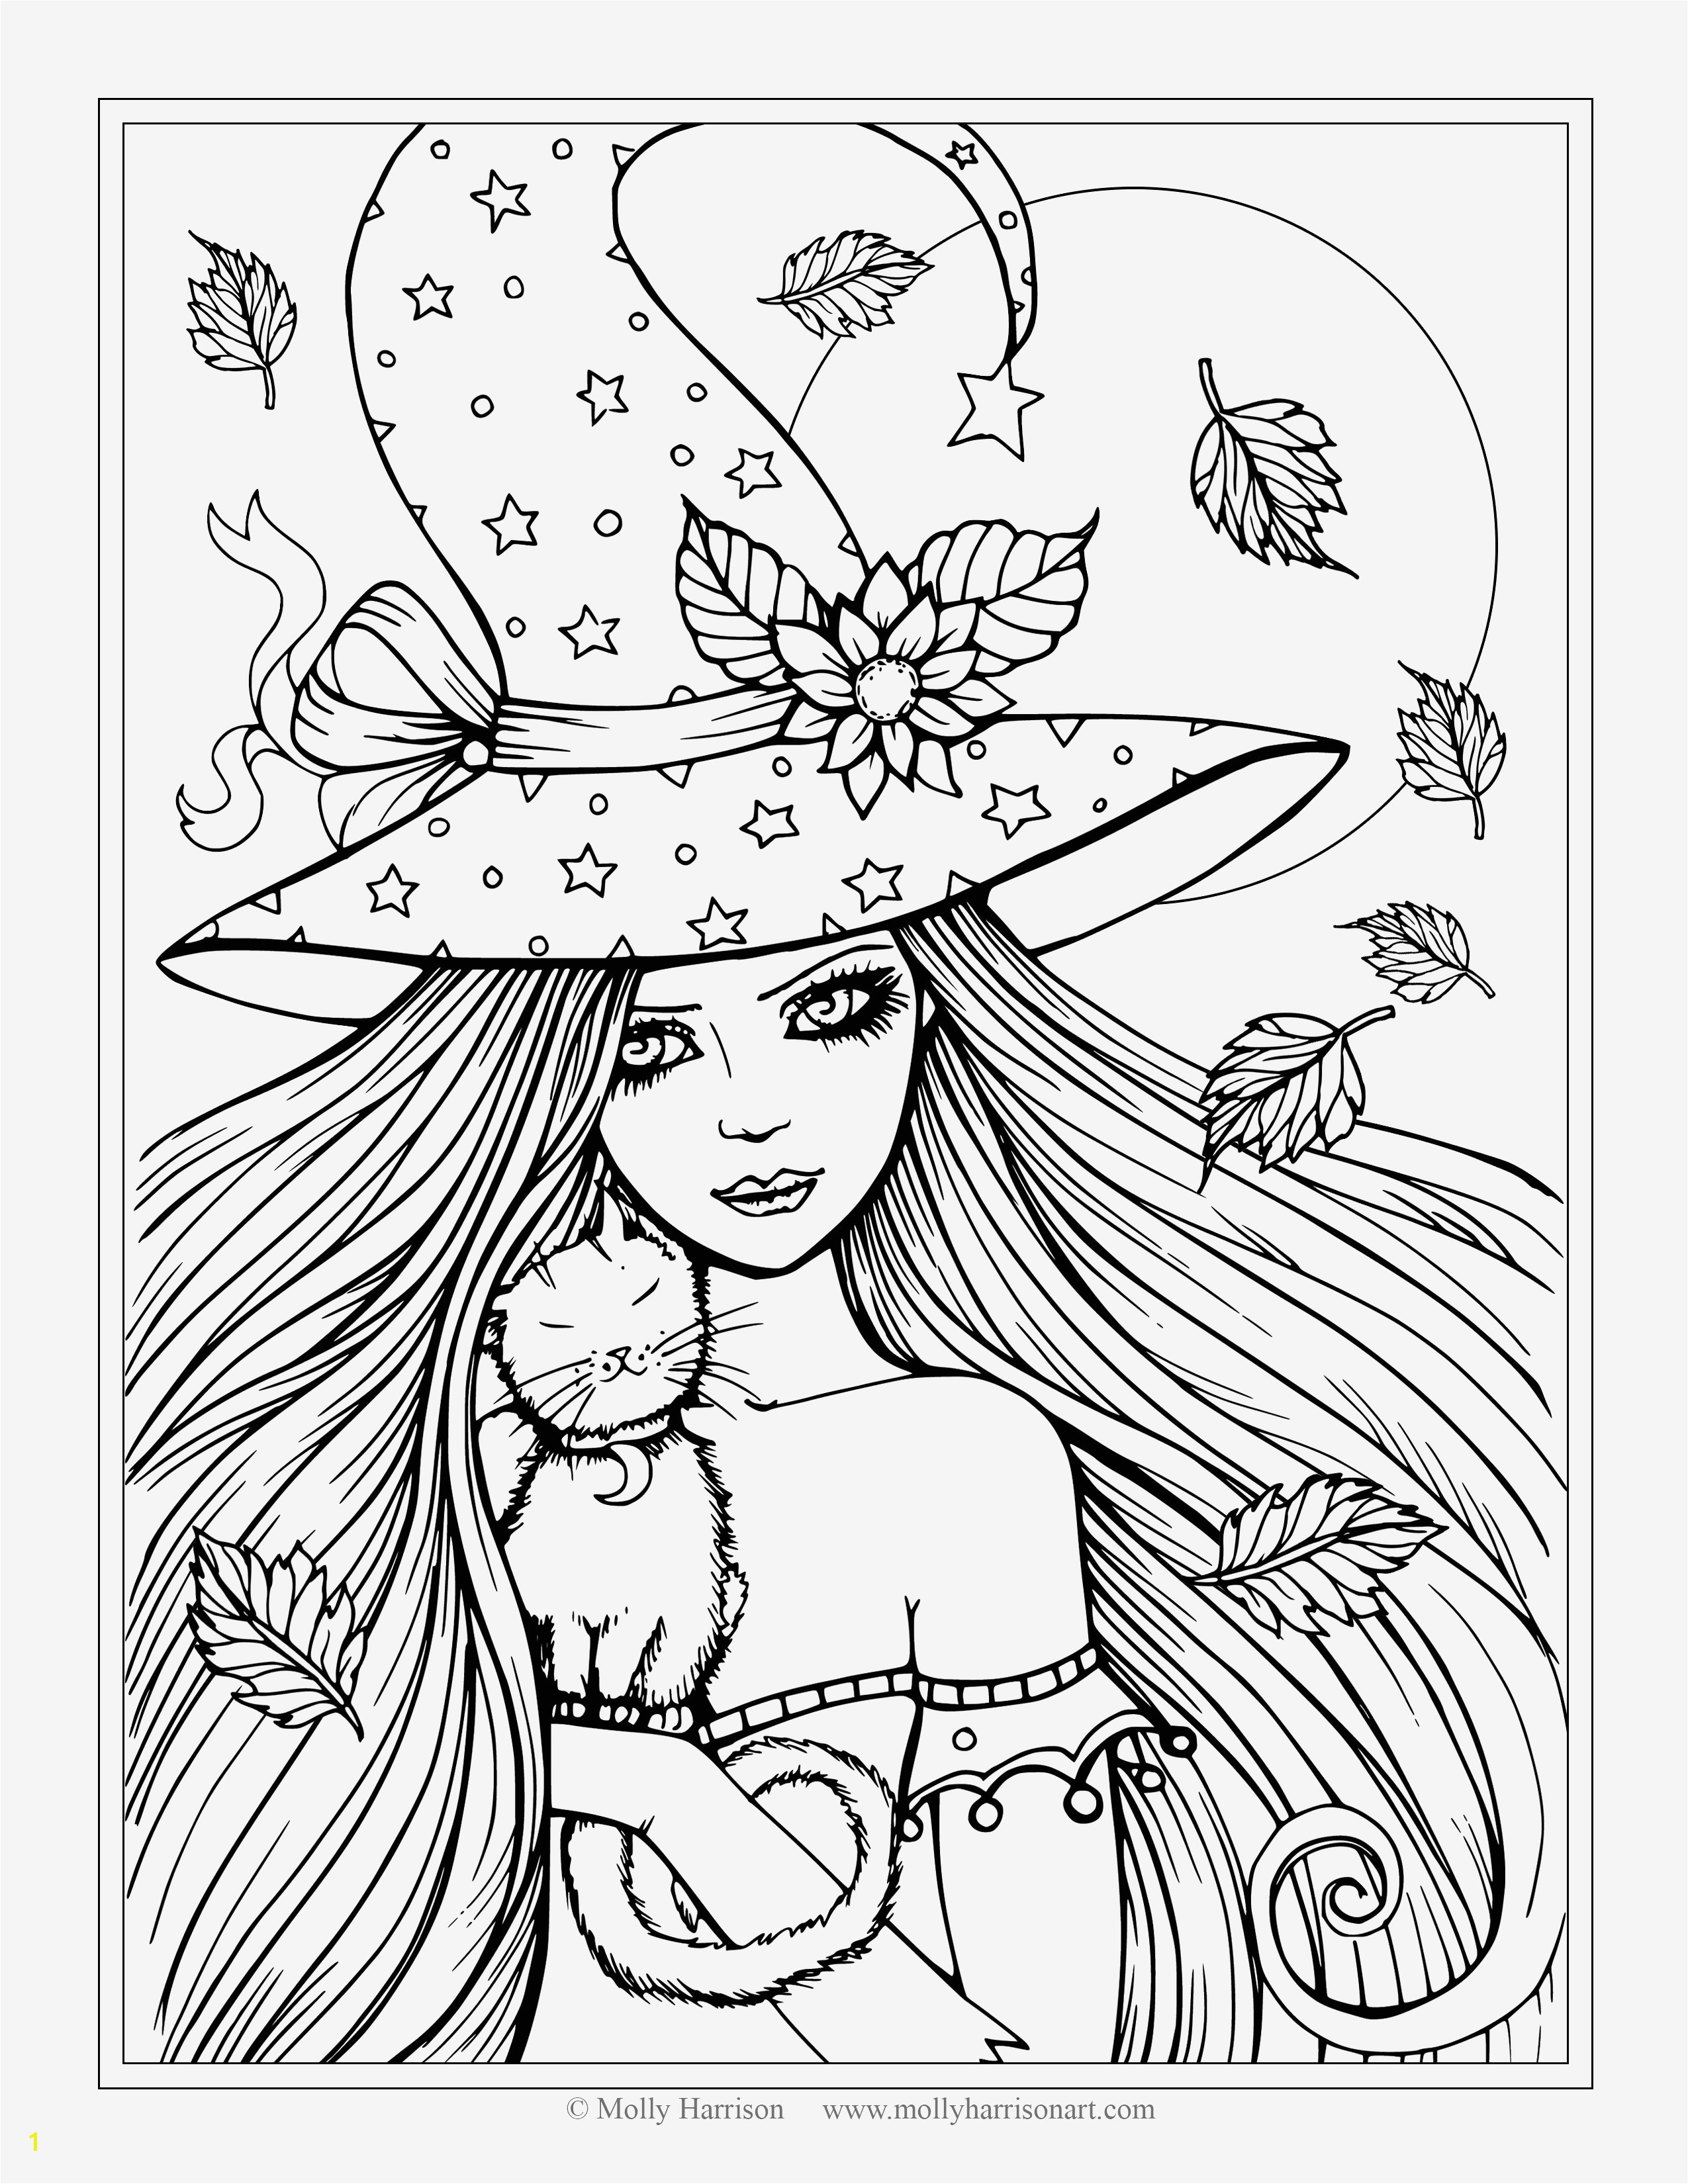 Royals Coloring Pages Printable Free Coloring Pages for Adults Best Printable Cds 0d